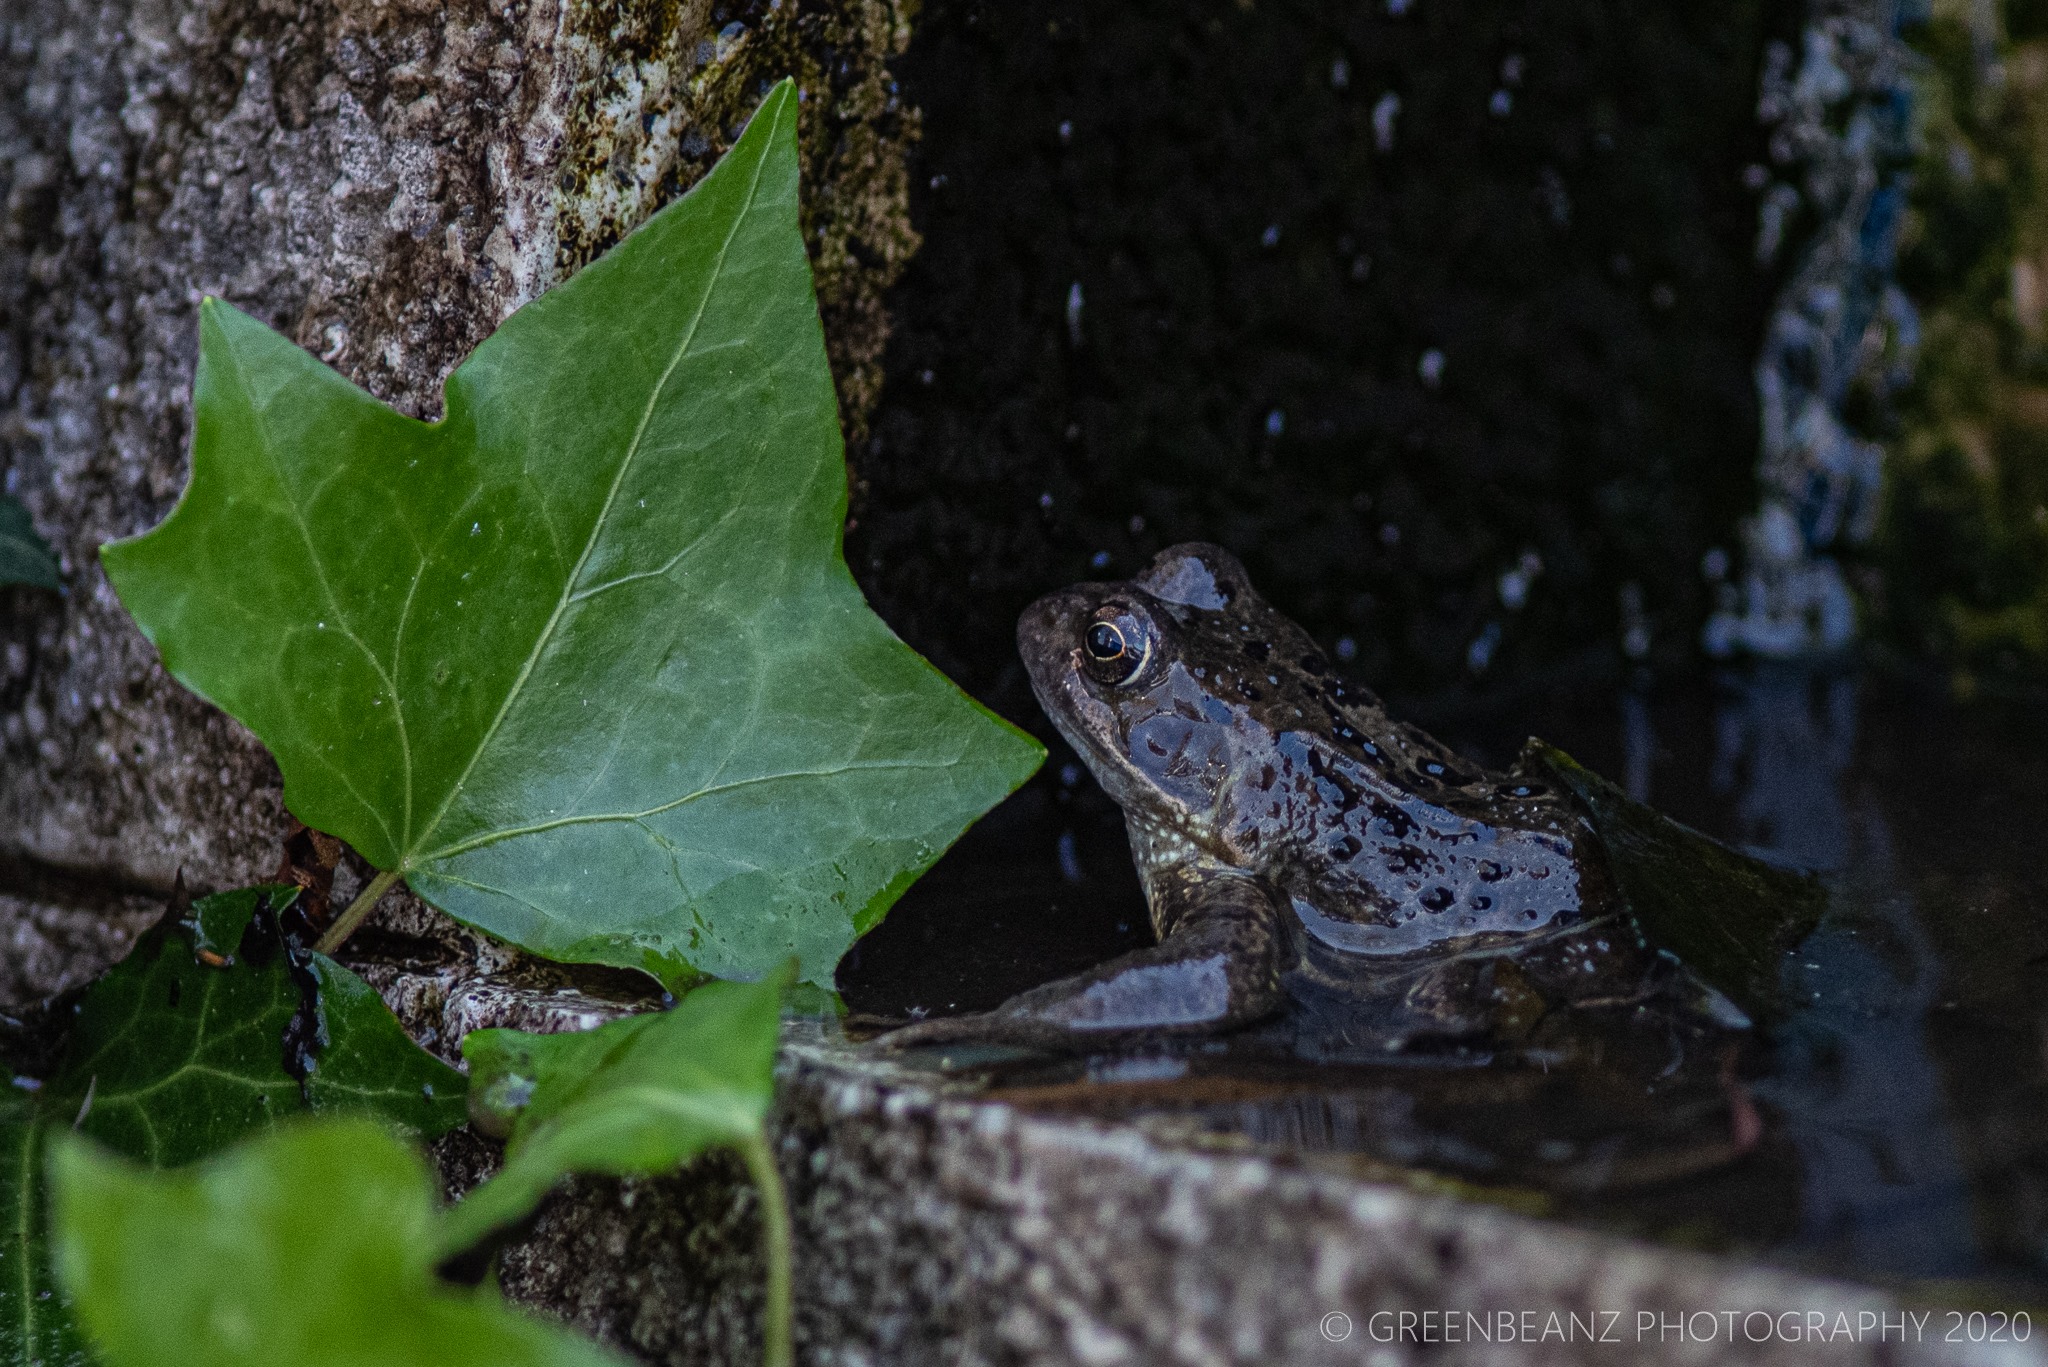 Frog in water feature